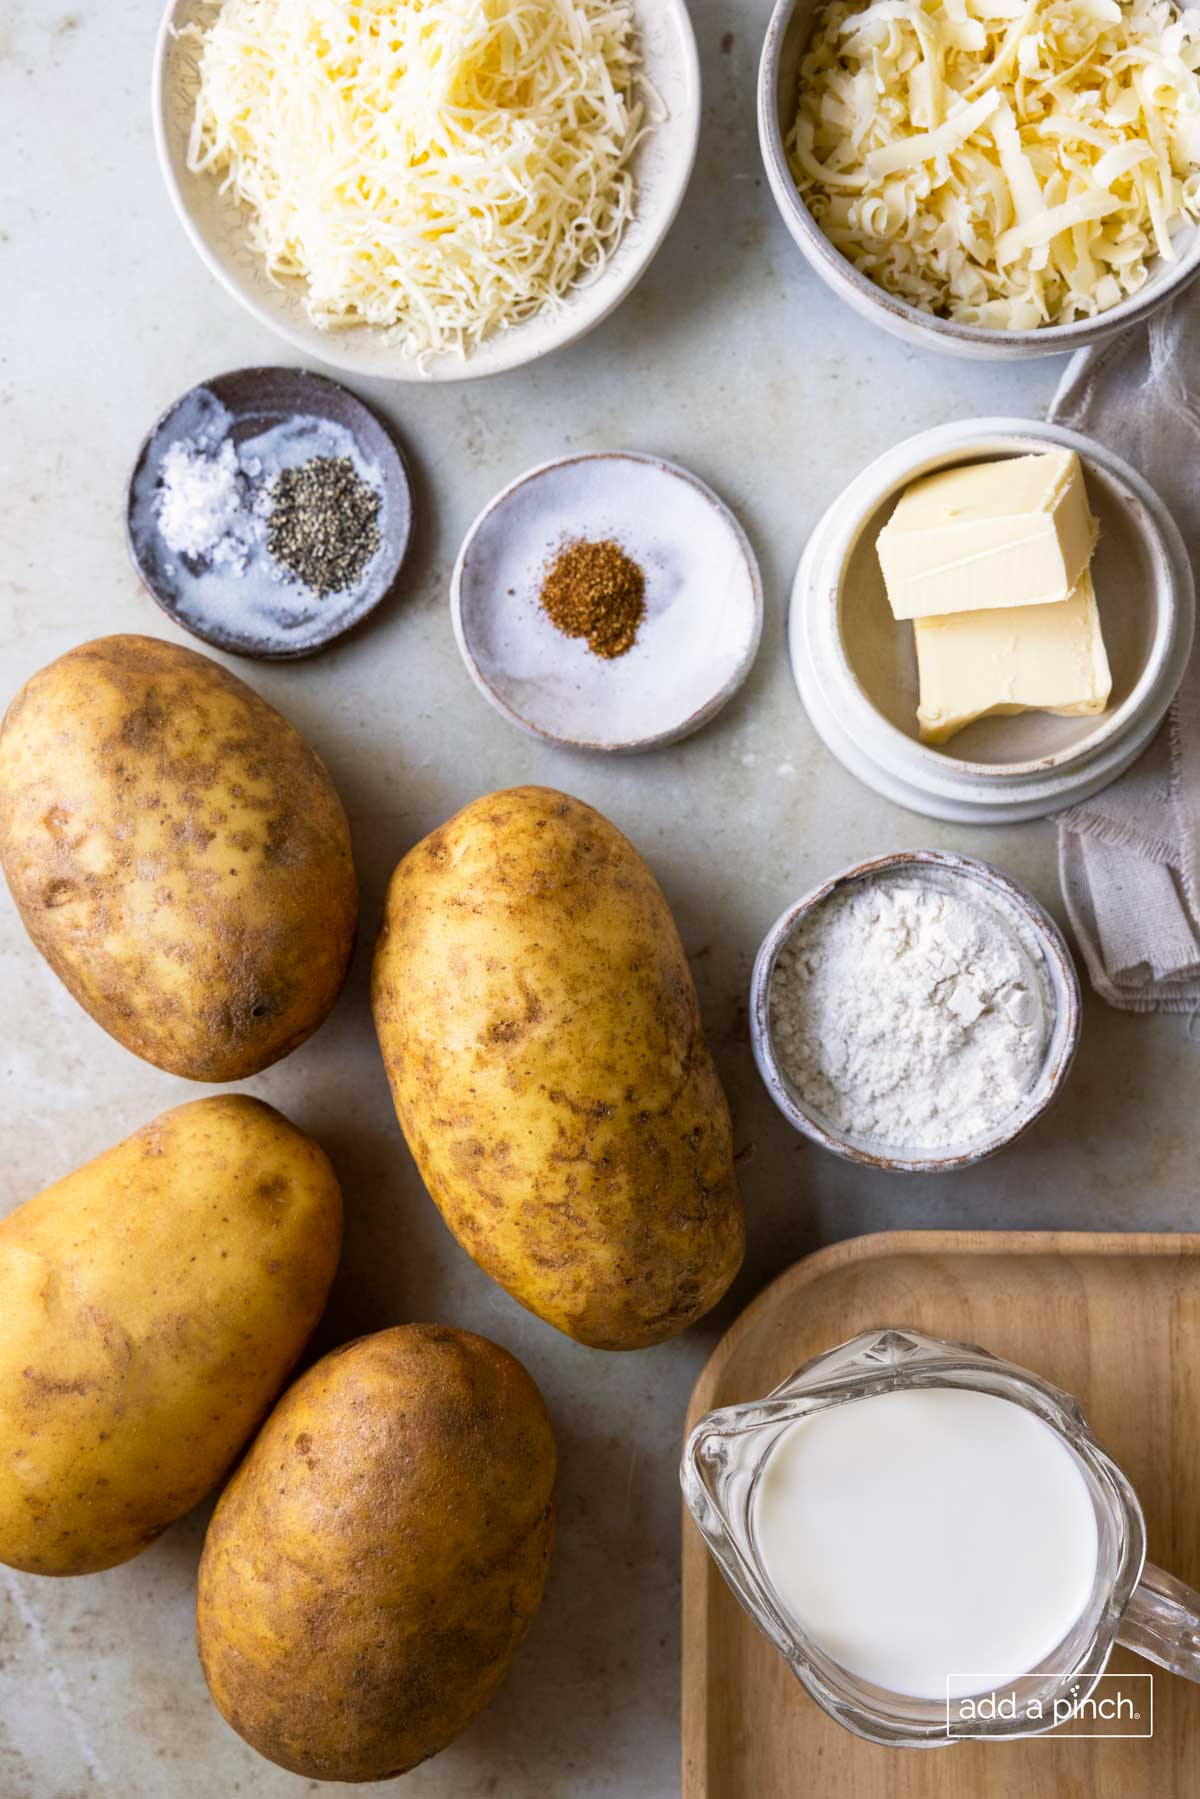 Photograph of potatoes, flour, butter, seasonings, milk and shredded cheese ready to be used to make a potato side dish.